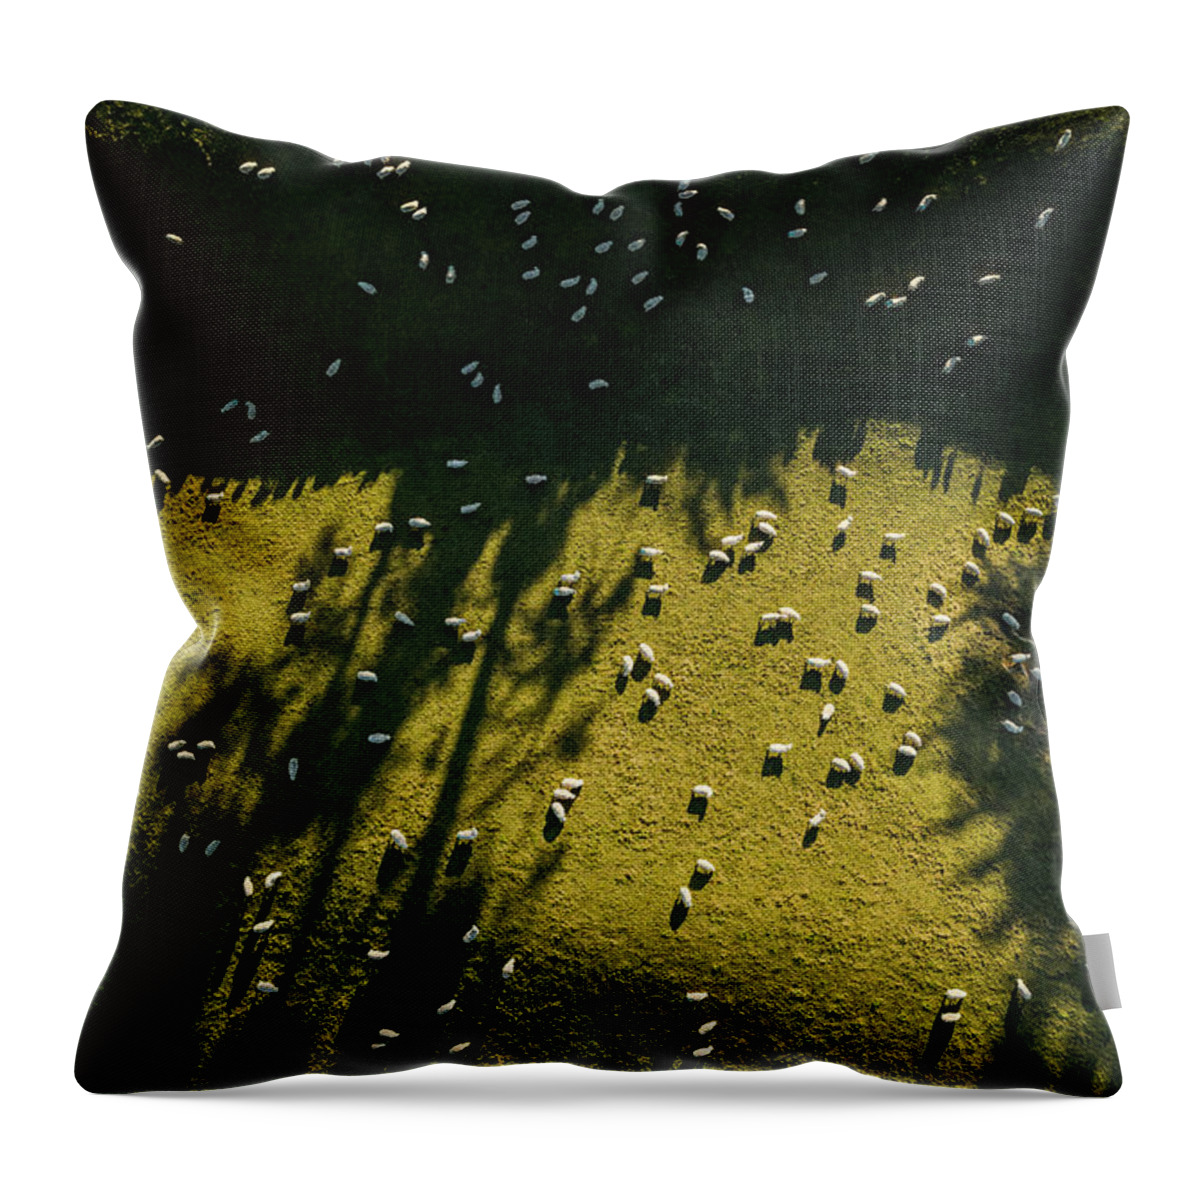 Grass Throw Pillow featuring the photograph Aerial View Of Sheep Grazing by Jason Hosking